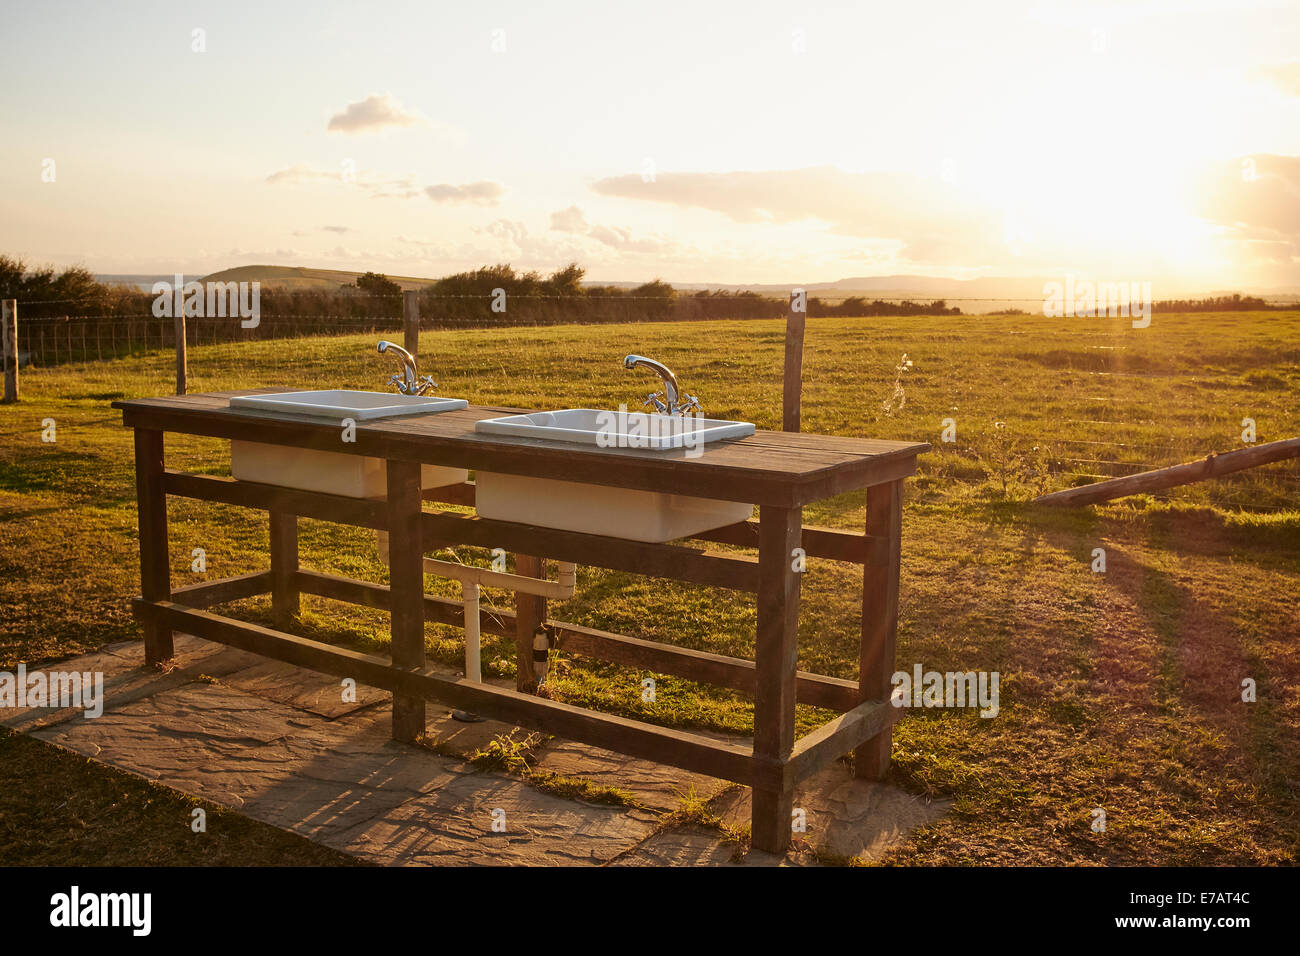 Outdoor wash basins in a rural landscape - indoors outdoors Stock Photo